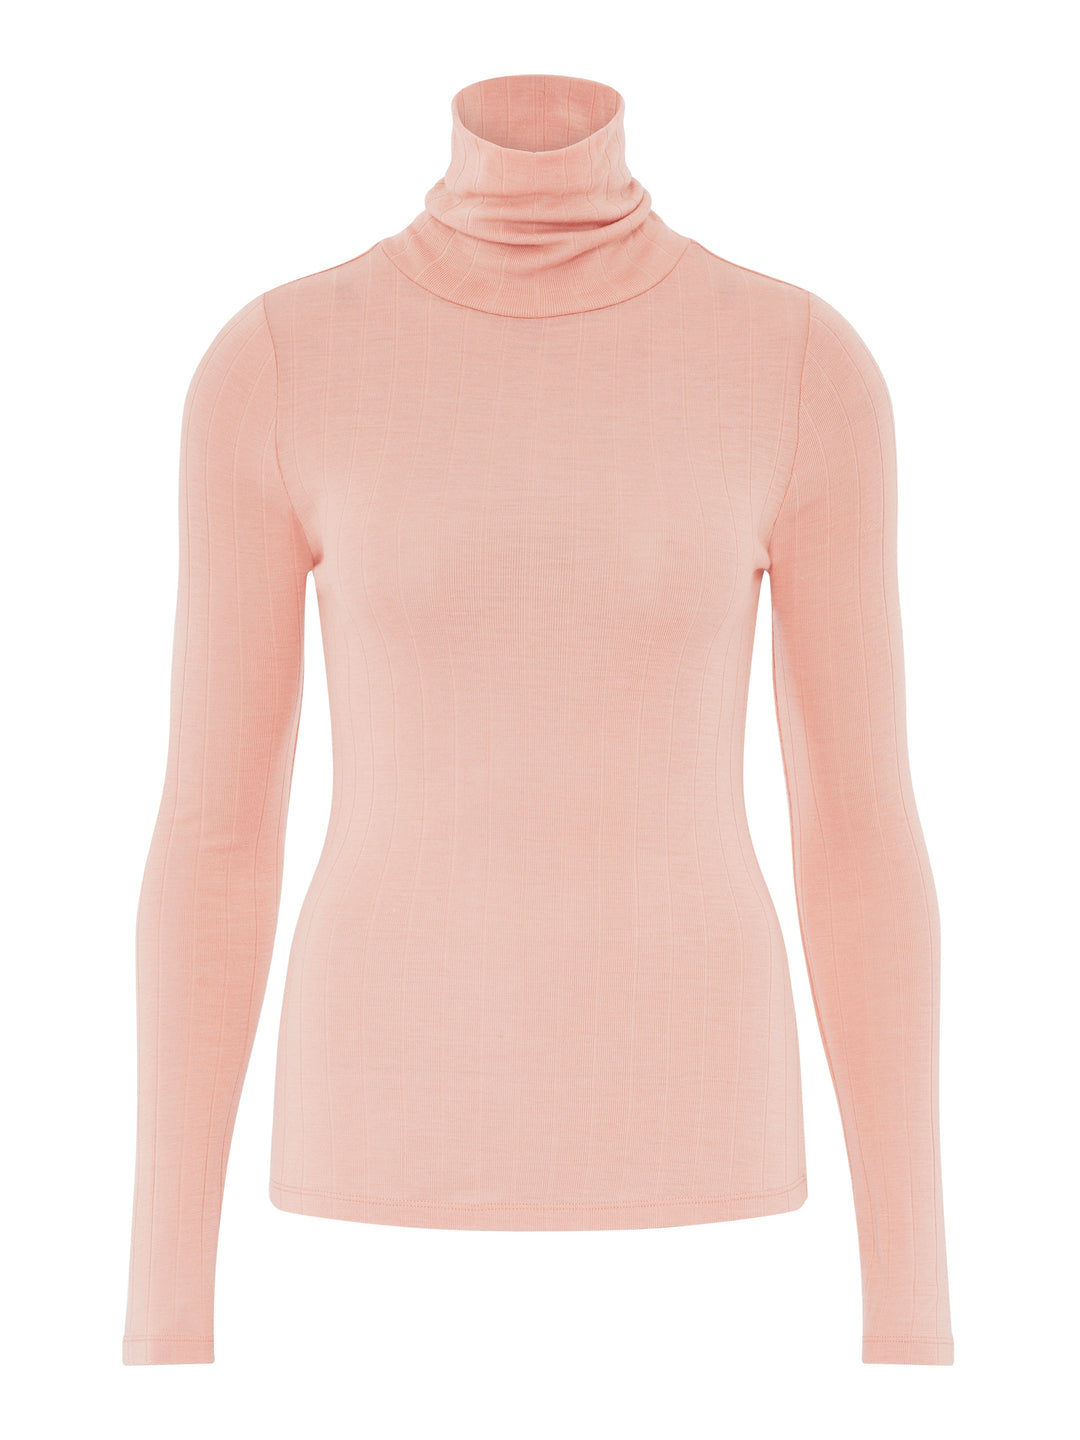 Chantelle Thermo Comfort Turtleneck - Pink Clay Jumper Chantelle 